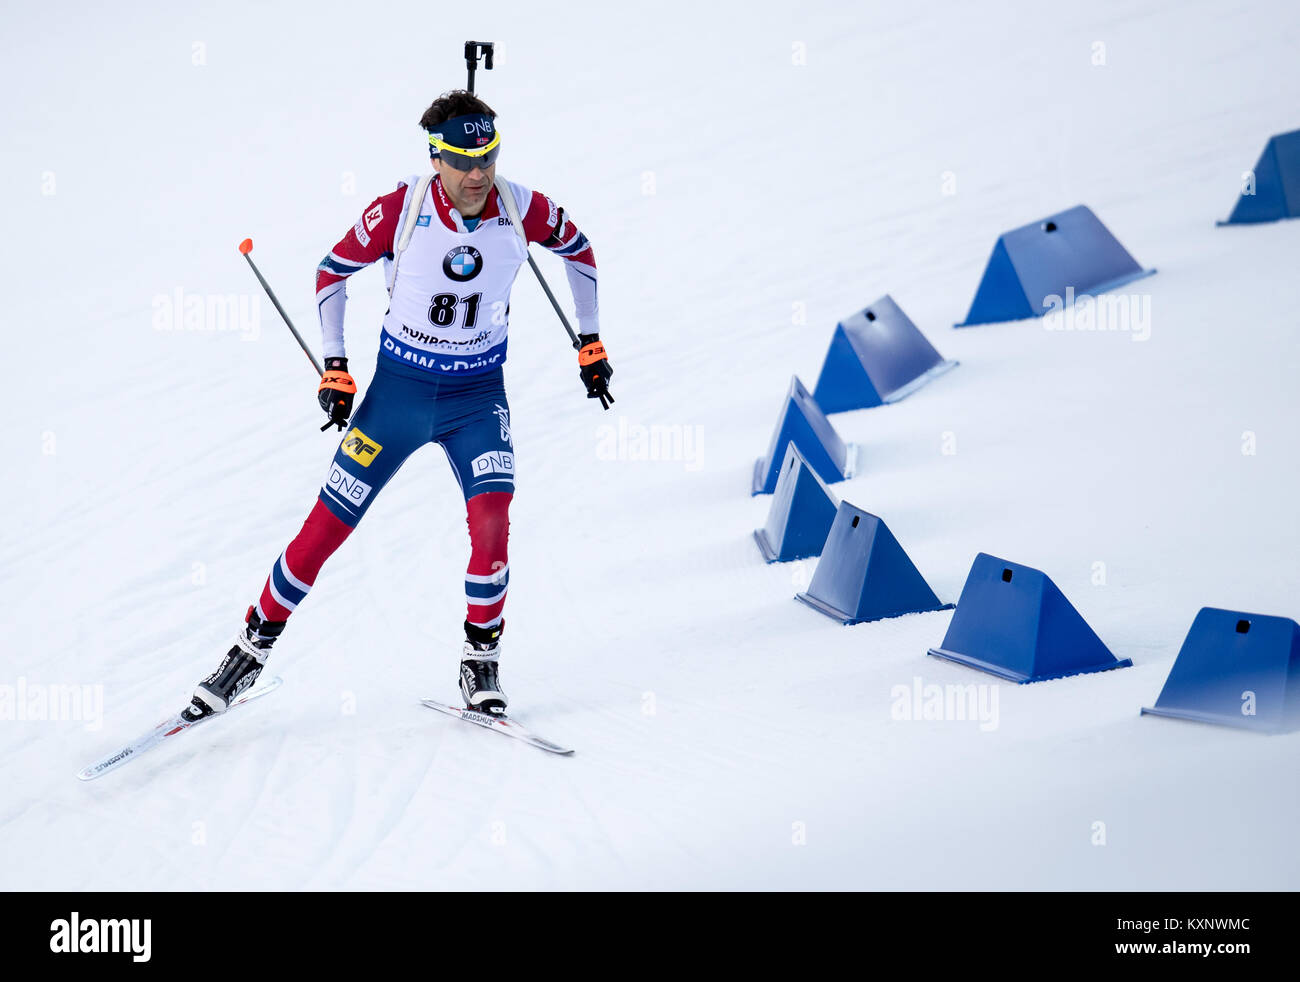 Ruhpolding, Germany. 11th Jan, 2018. Biathlet Ole Einar Björndalen from Norway skis during the race at Chiemgau Arena in Ruhpolding, Germany, 11 January 2018. Credit: Sven Hoppe/dpa/Alamy Live News Stock Photo